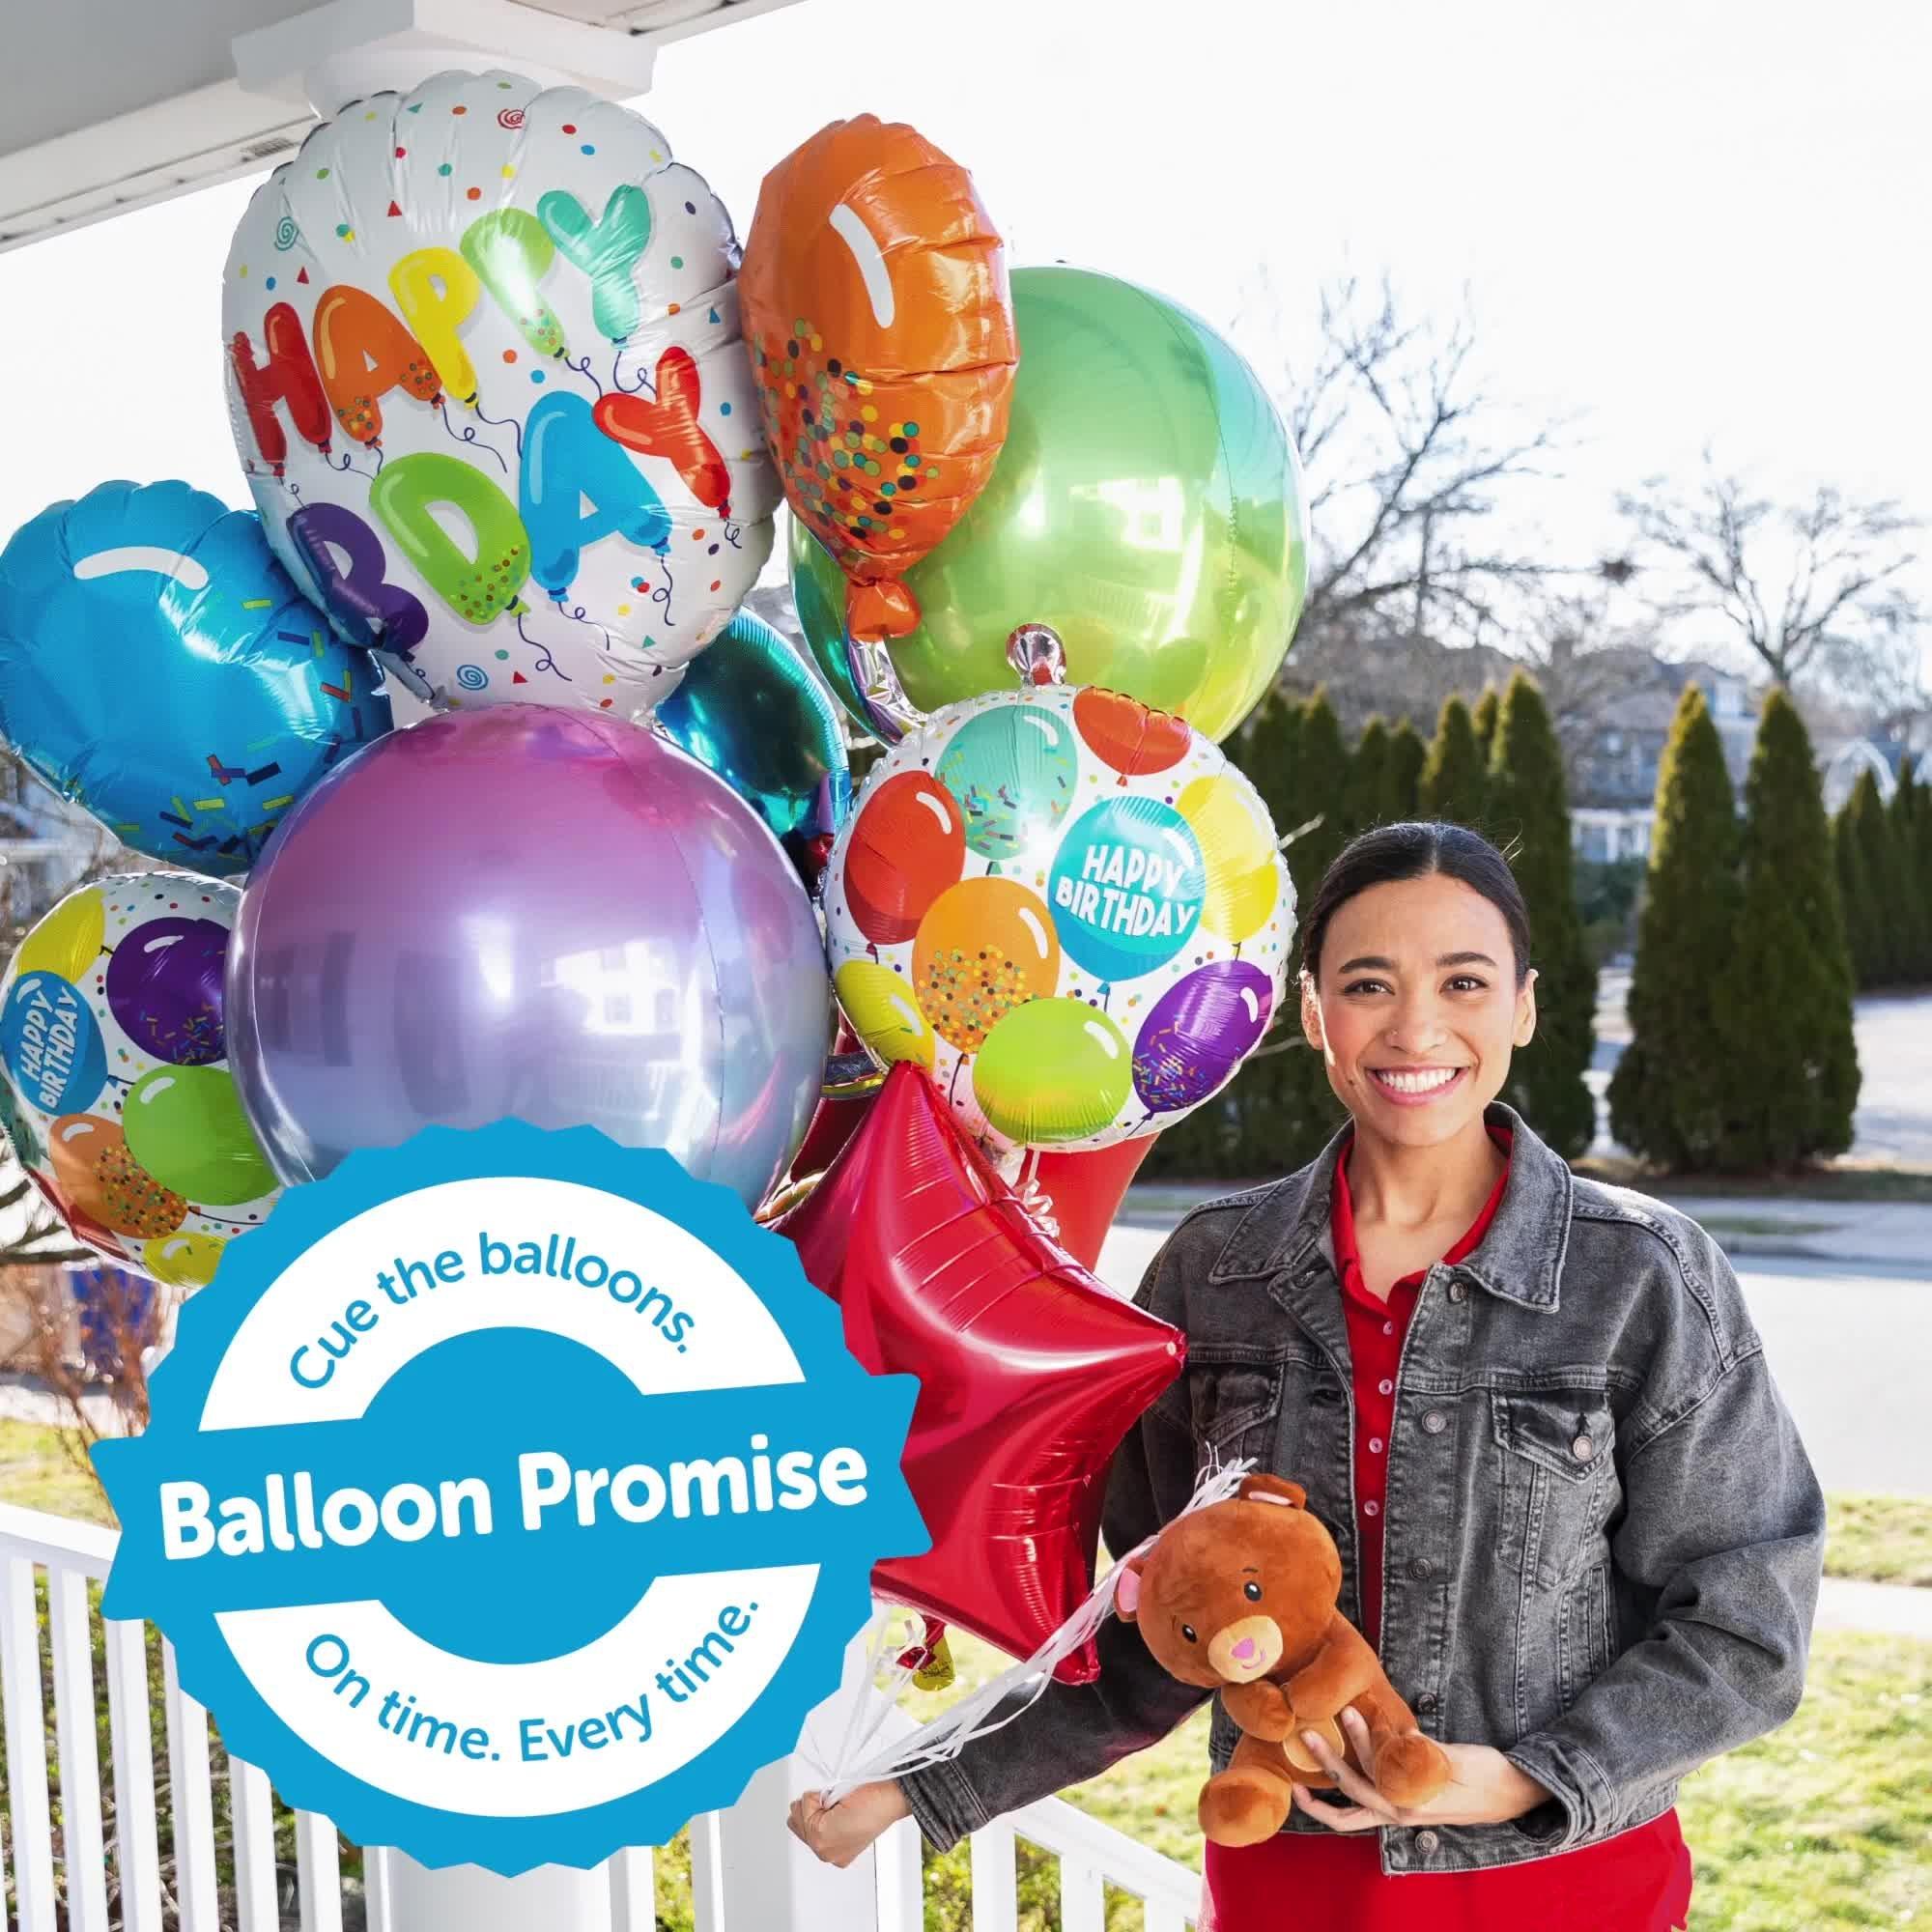 Daisy Chain Foil Balloon Bouquet with Balloon Weight & Lindt Chocolates Mother's Day Gift Set